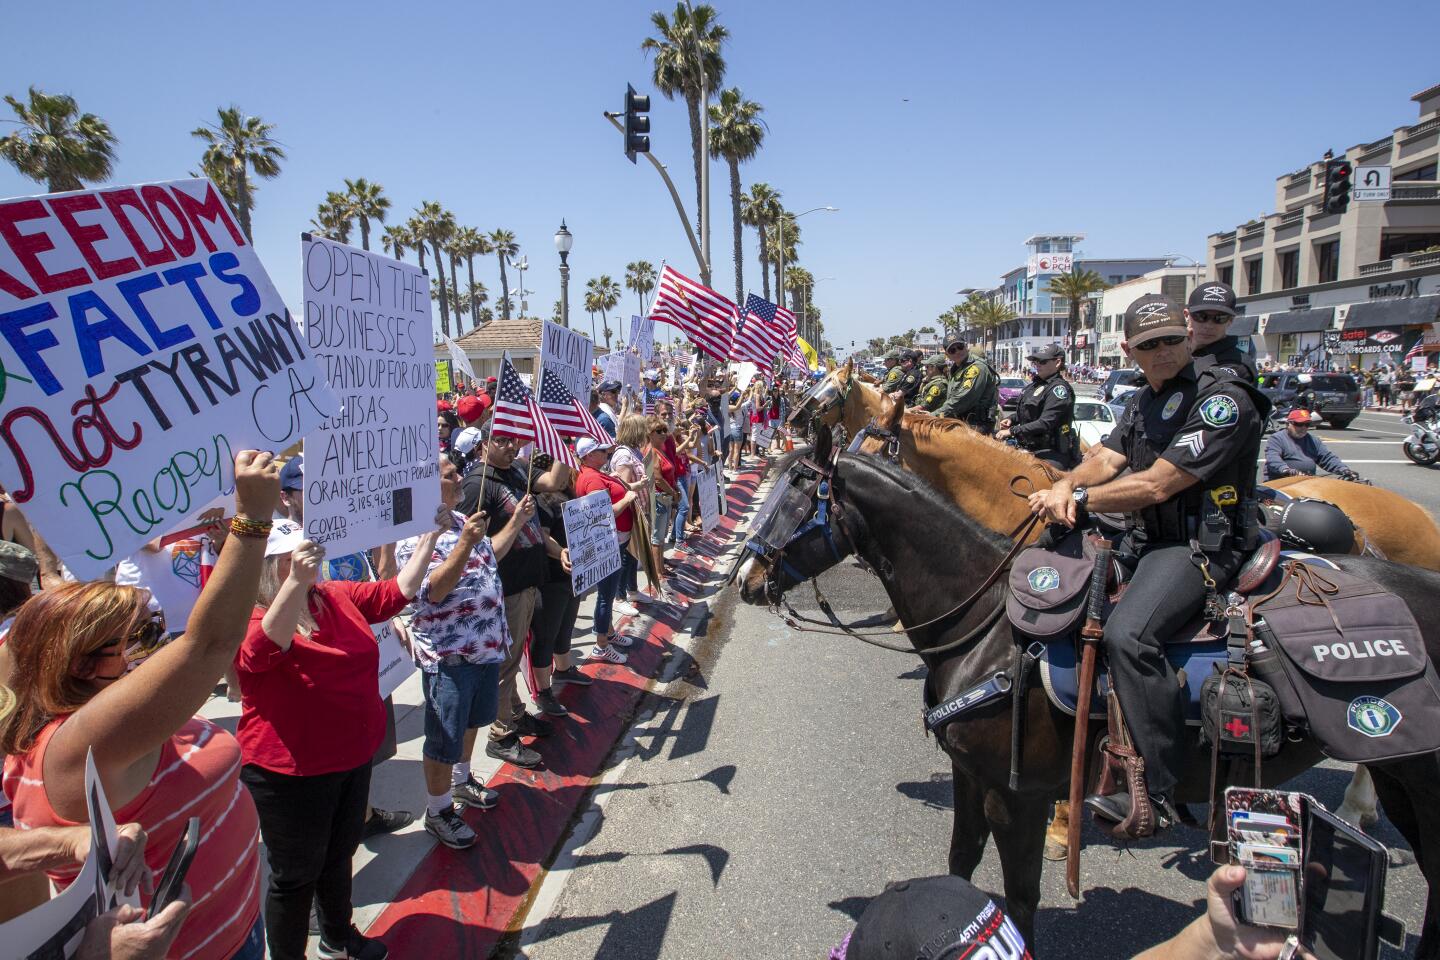 Police line up to keep protesters on the sidewalk in Huntington Beach